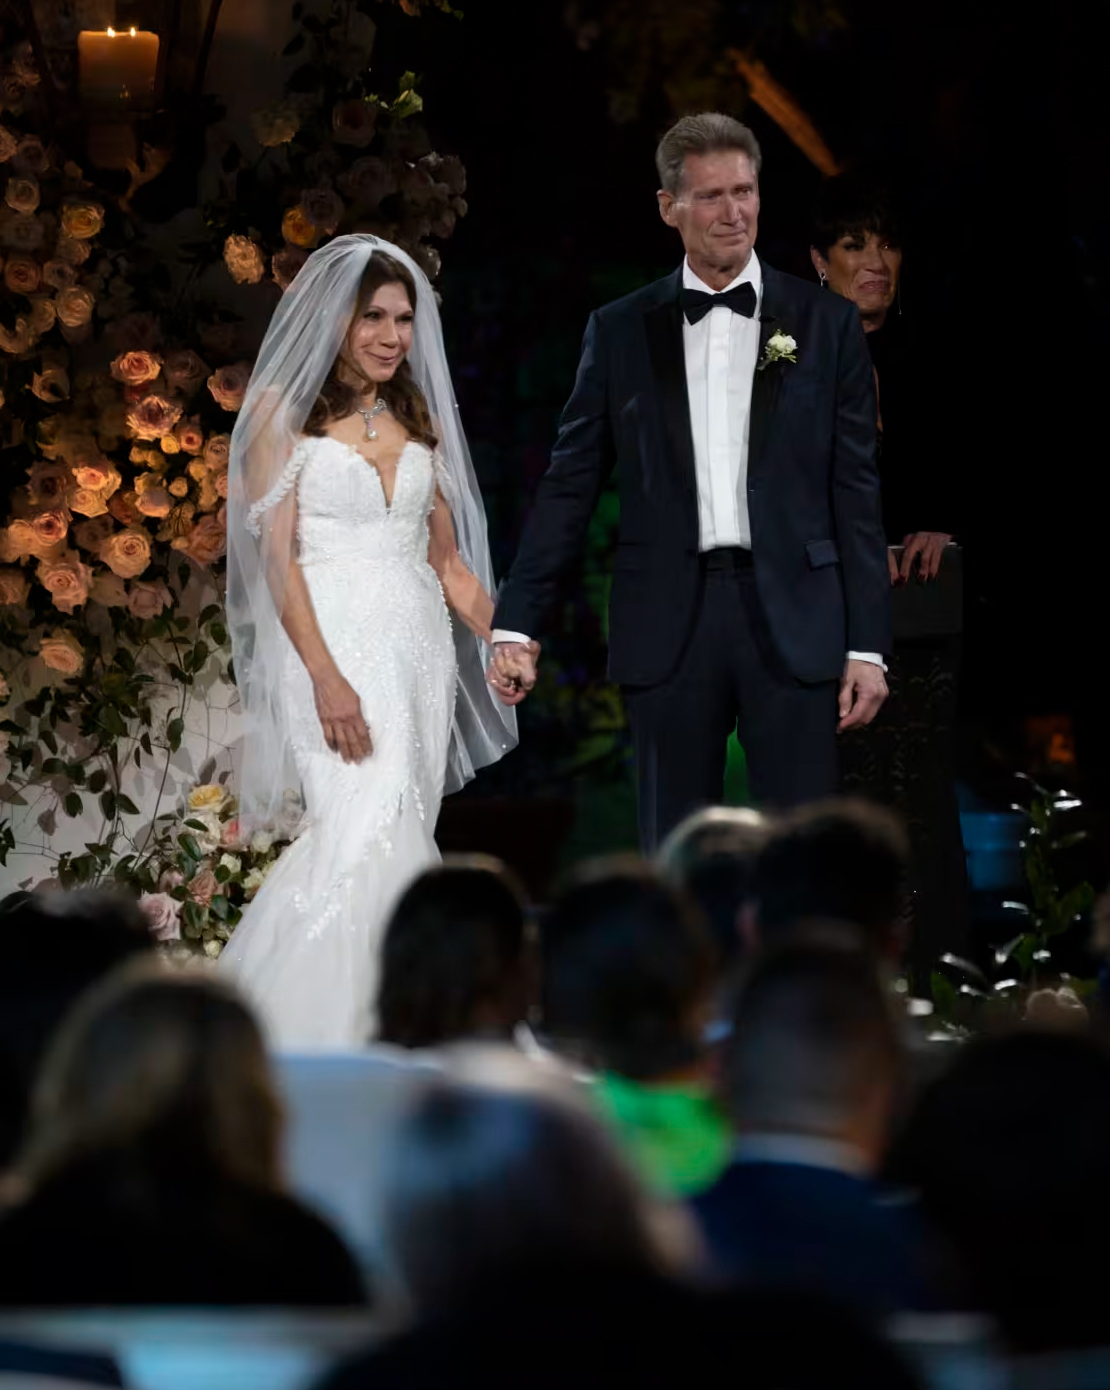 Theresa and Gerry Turner walked down the aisle during the Golden Bachelor Wedding Special